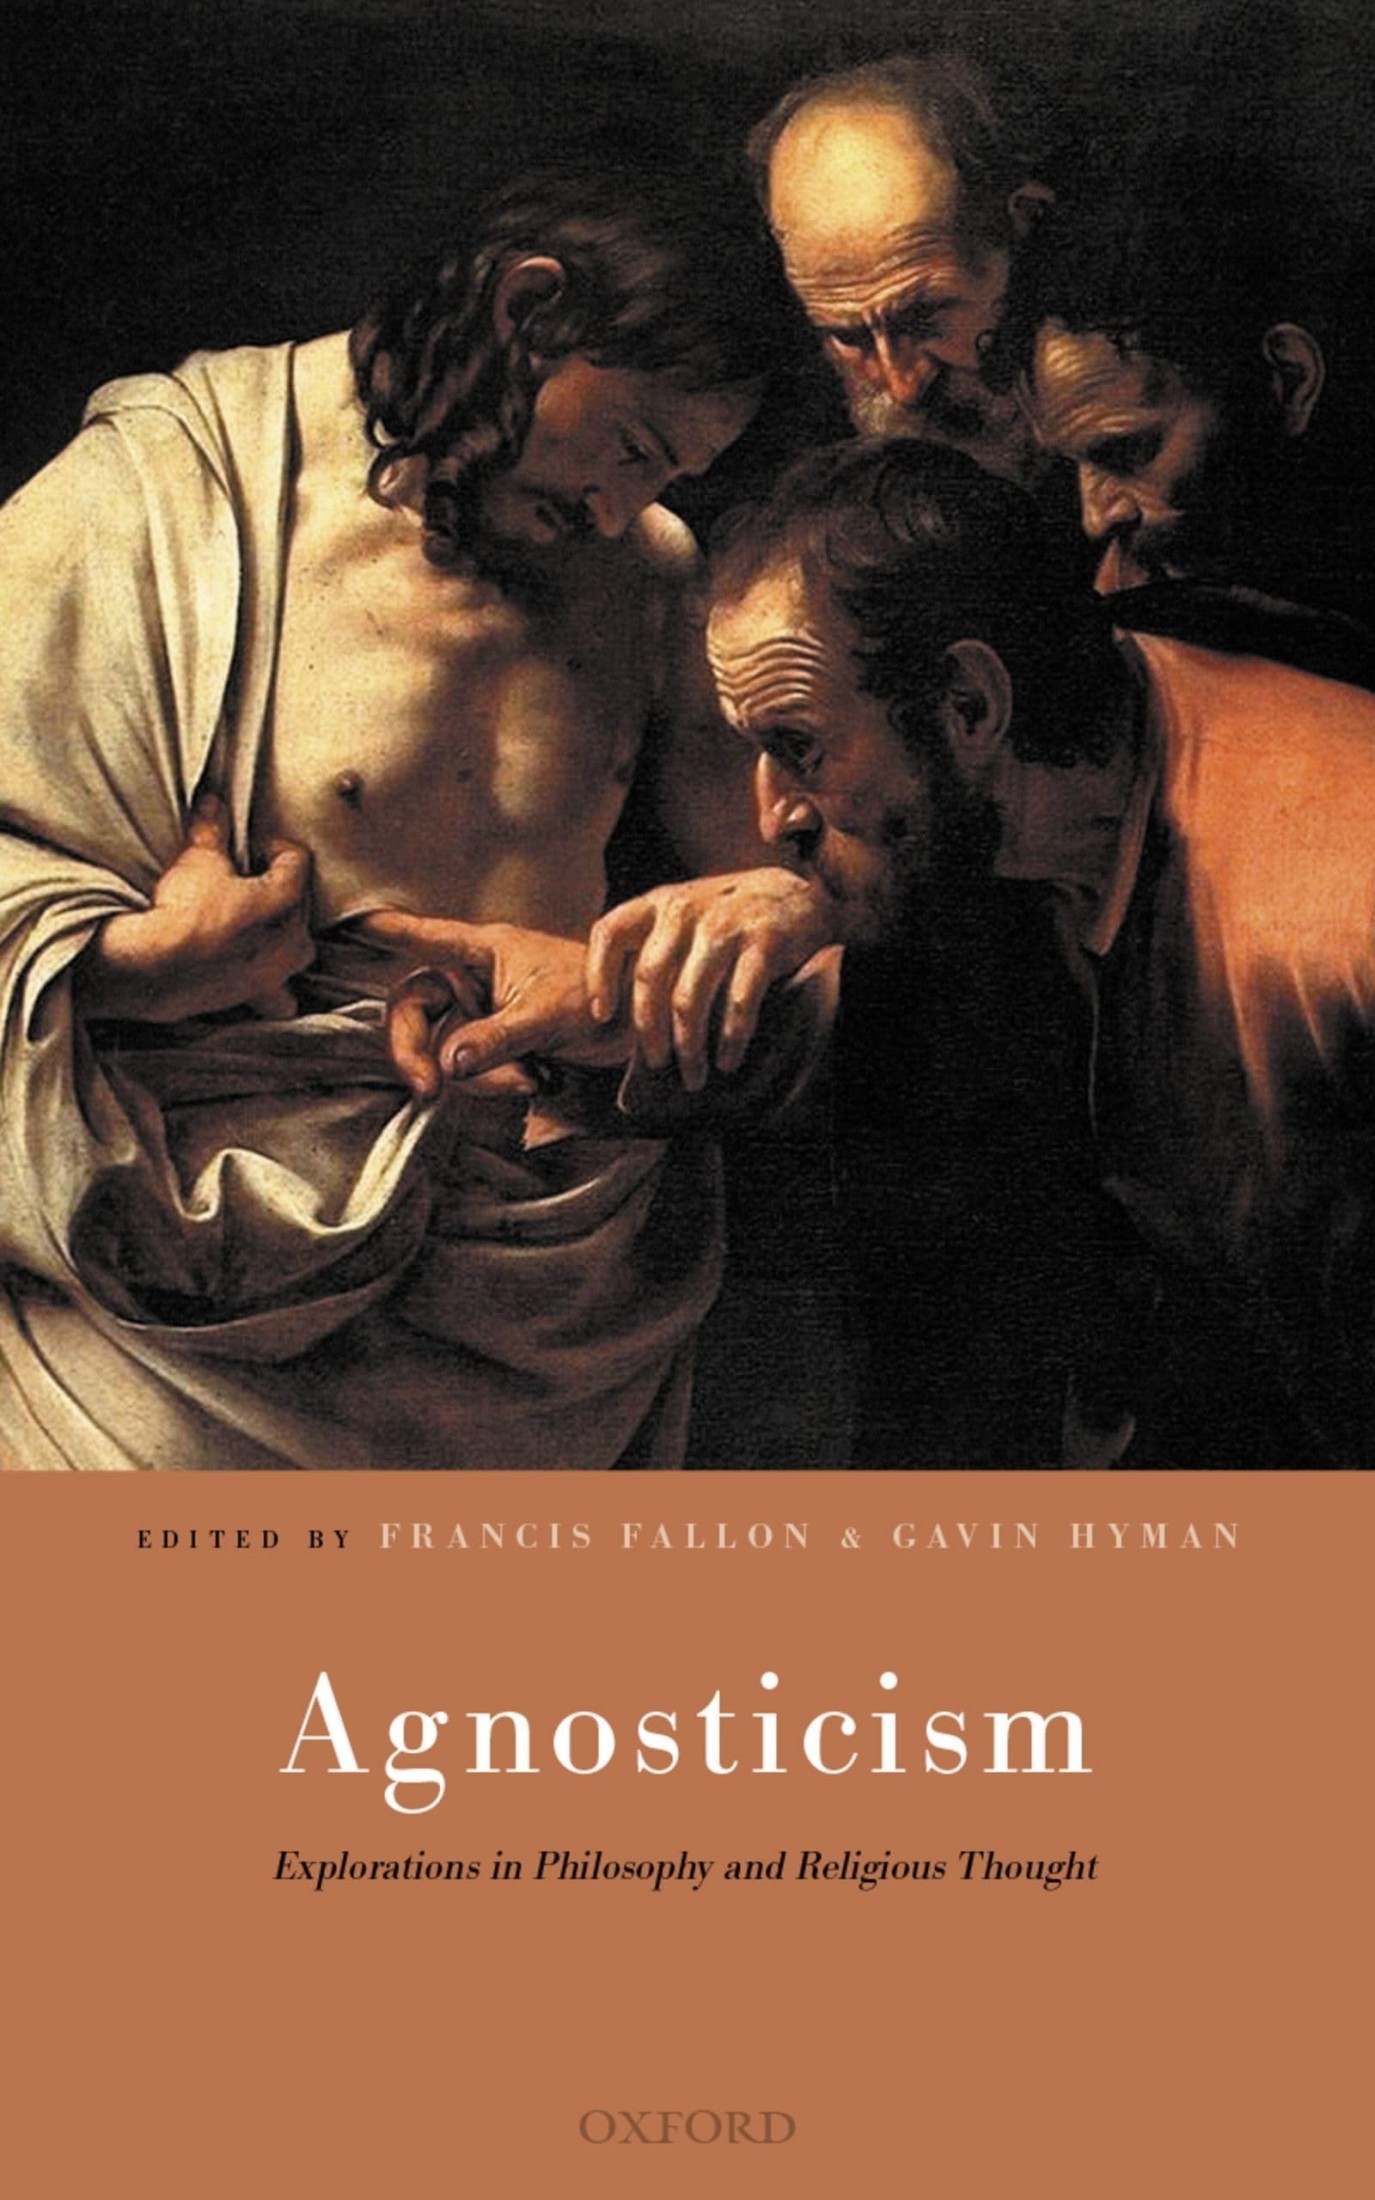 Agnosticism: Explorations in Philosophy and Religious Thought